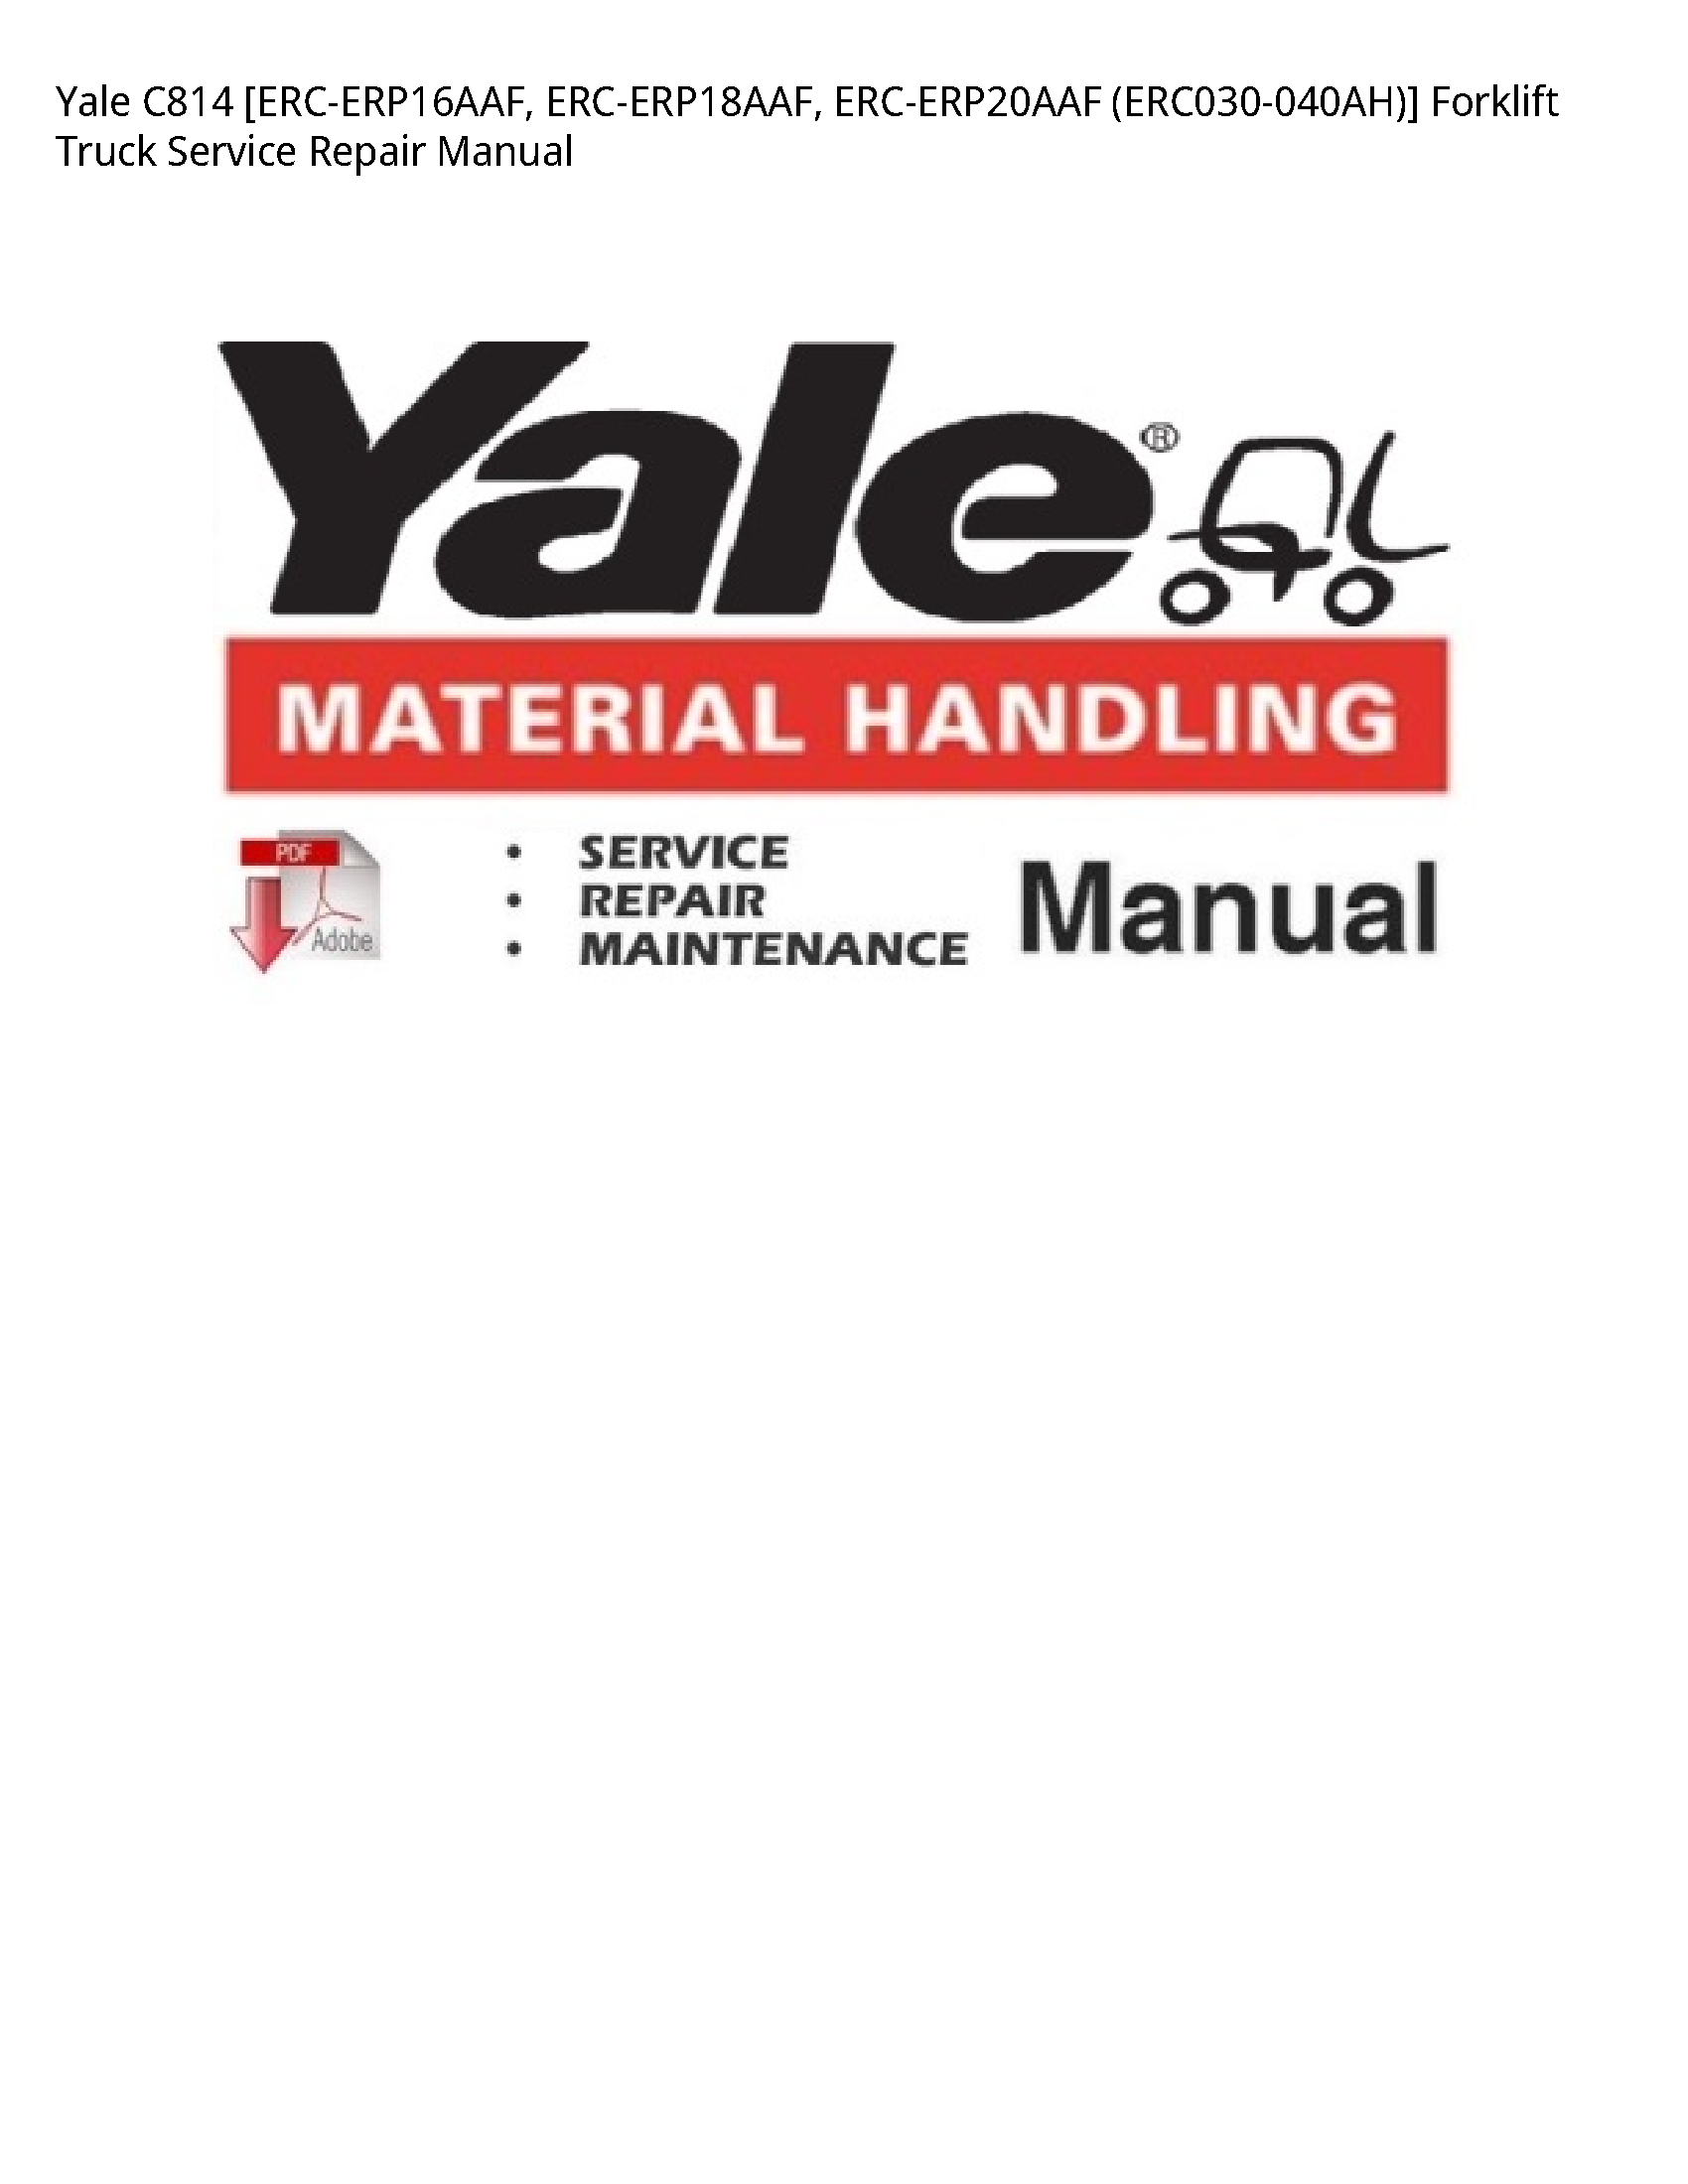 Yale C814 Forklift Truck manual